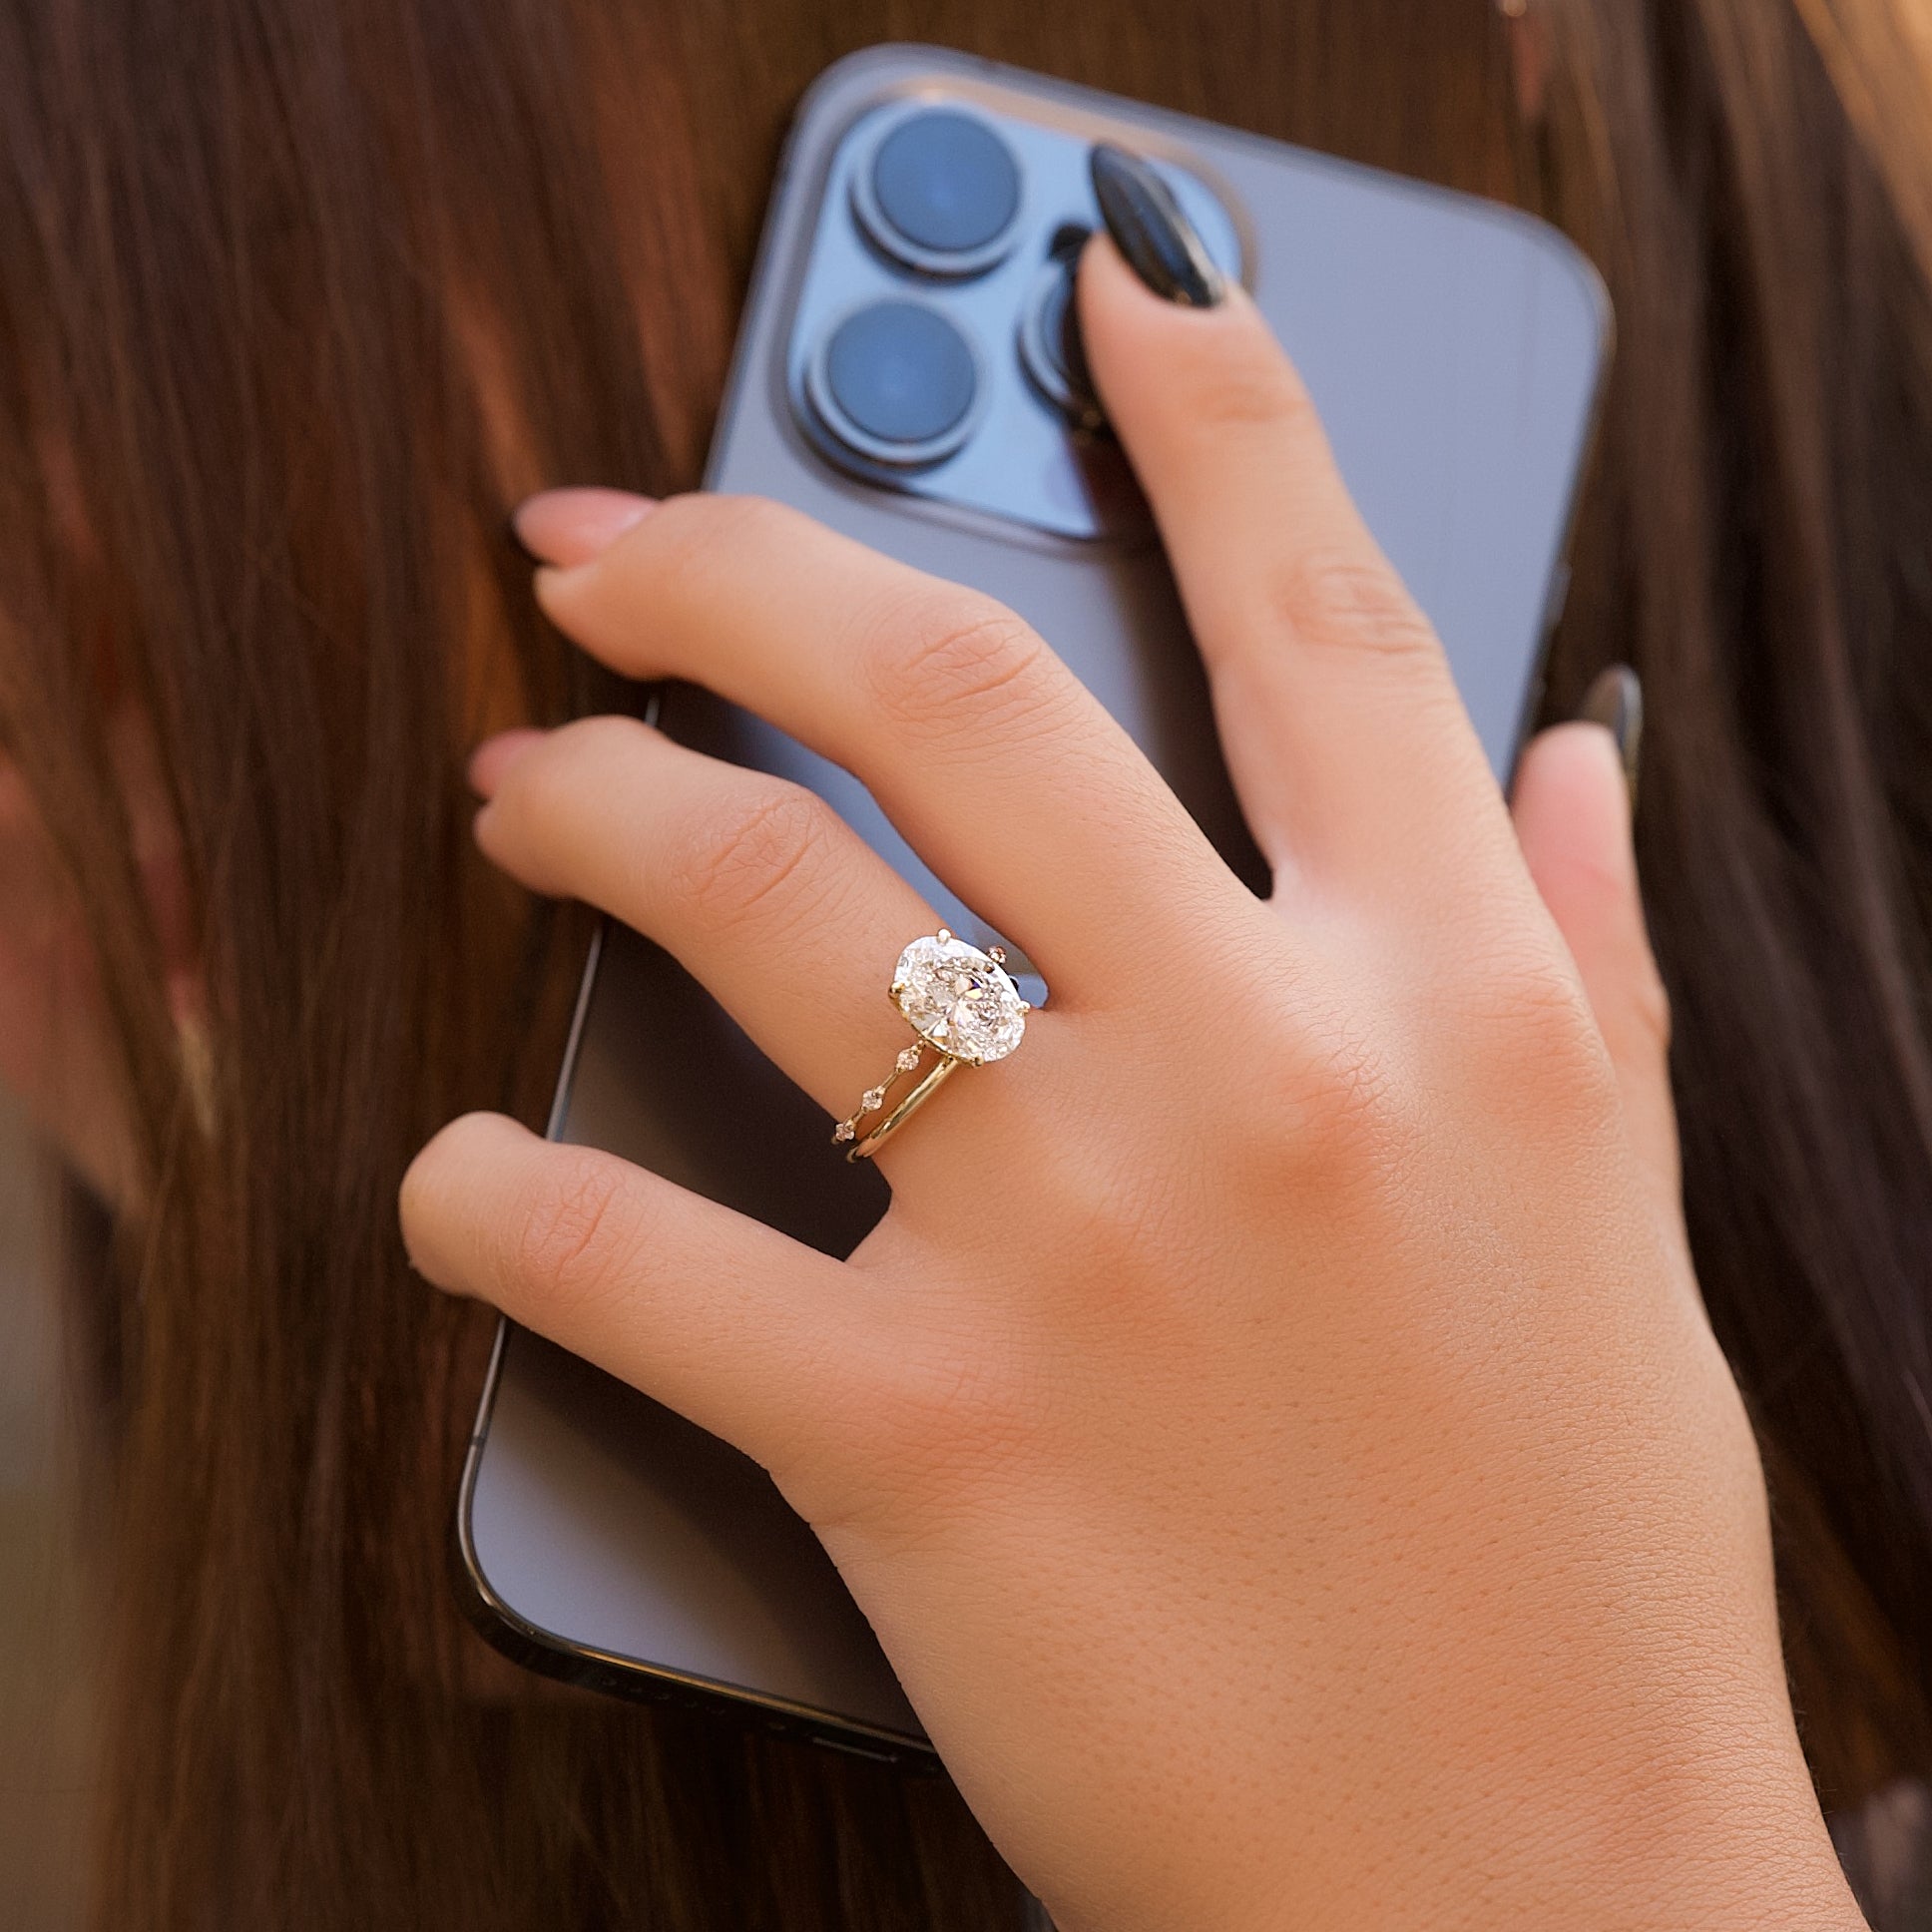 How tight should an engagement ring be? - Gardens of the Sun